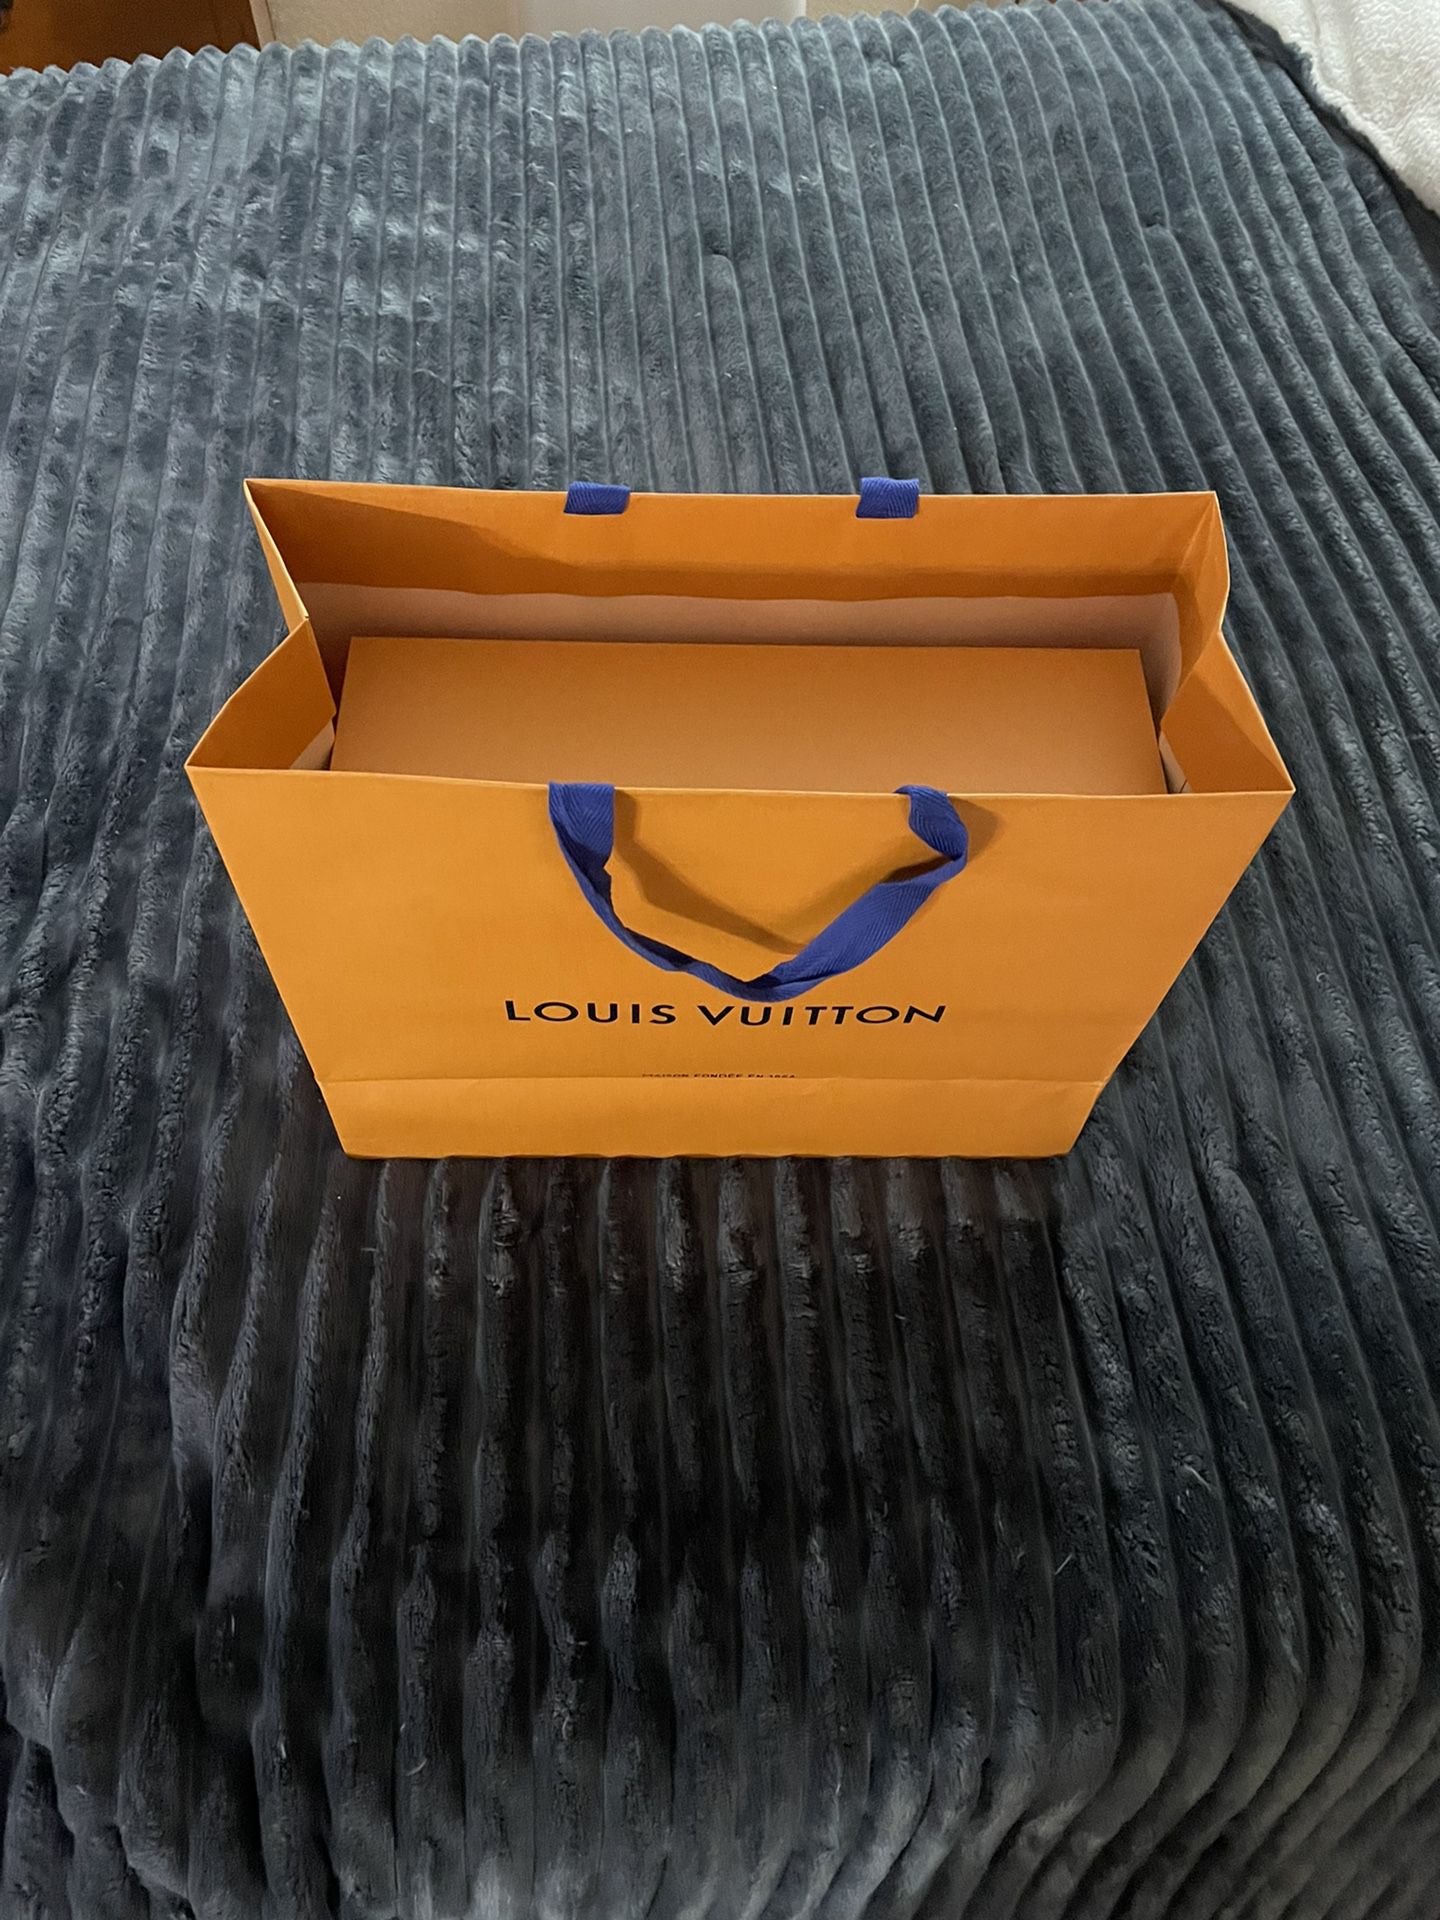 Authentic Louis Vuitton Box With Bag X2 for Sale in Las Vegas, NV - OfferUp